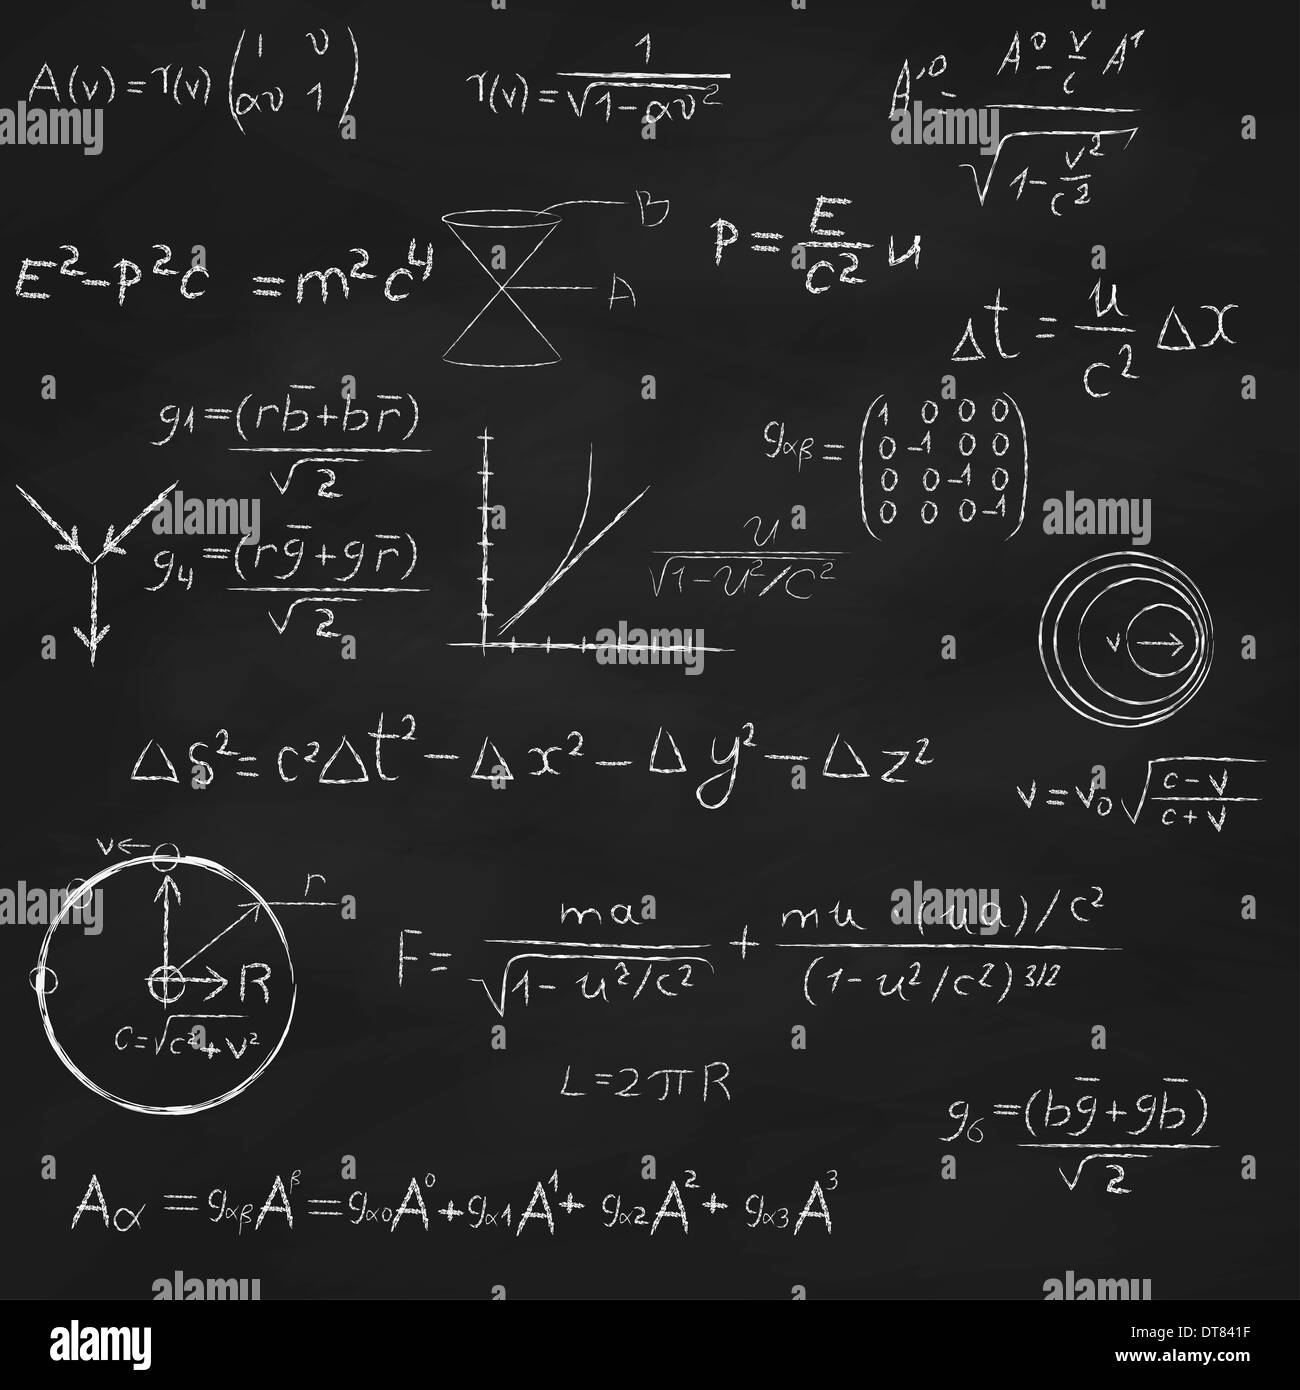 Background with blackboard, with relativity and string theory equations, formulas and hand drawings. Stock Photo